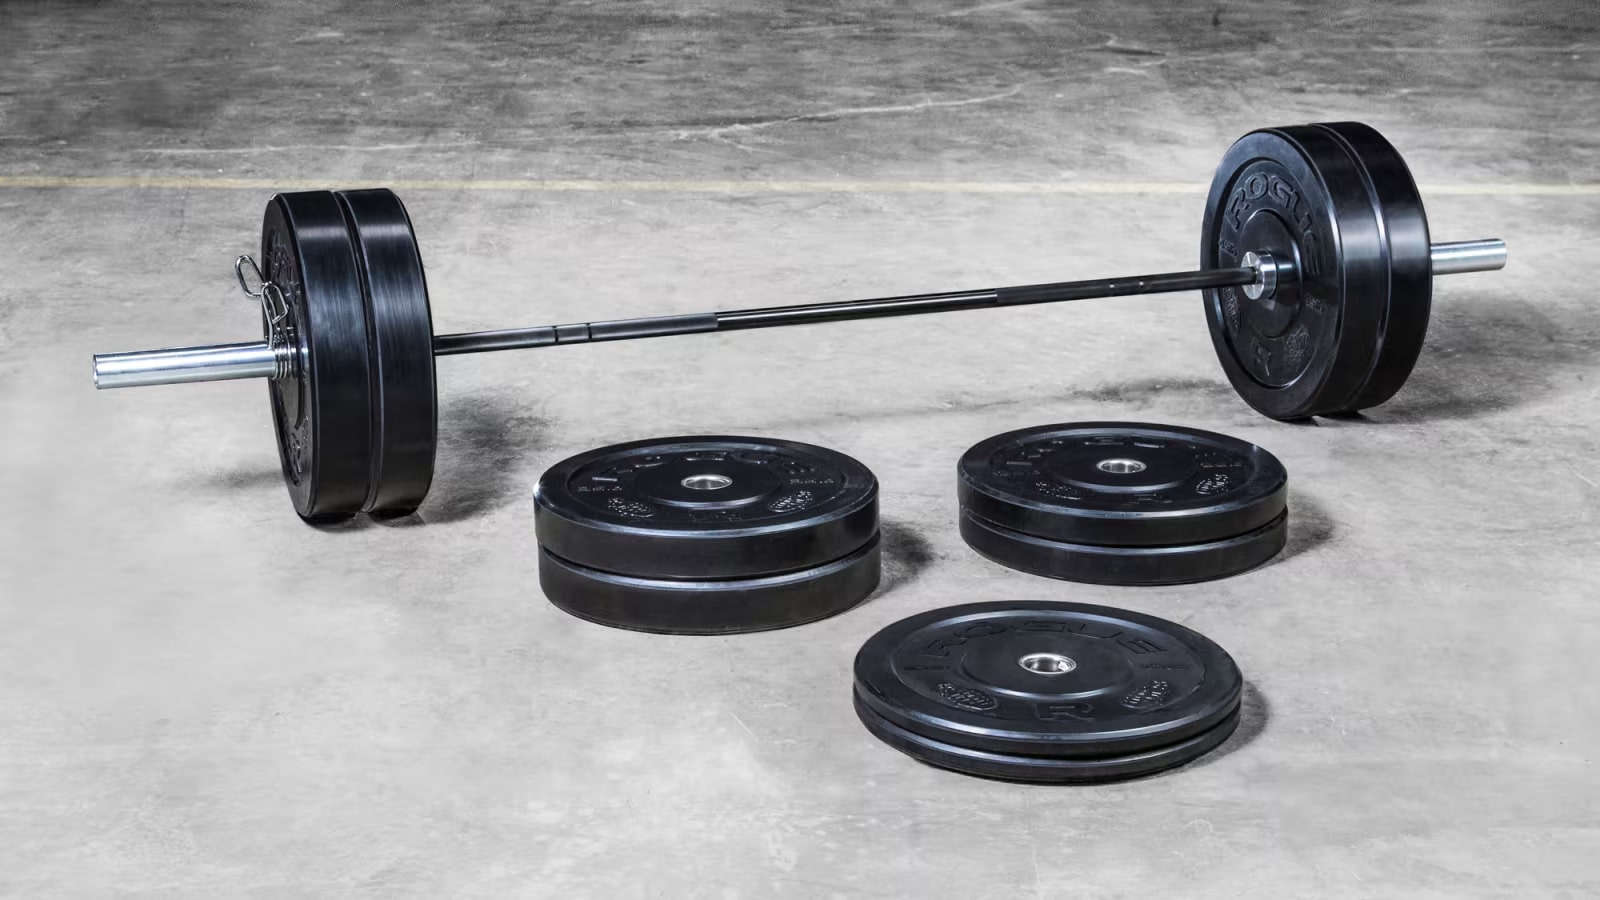 Barbell Set
Best Barbell Set
Barbell weight set
Barbell weight plates
home gym